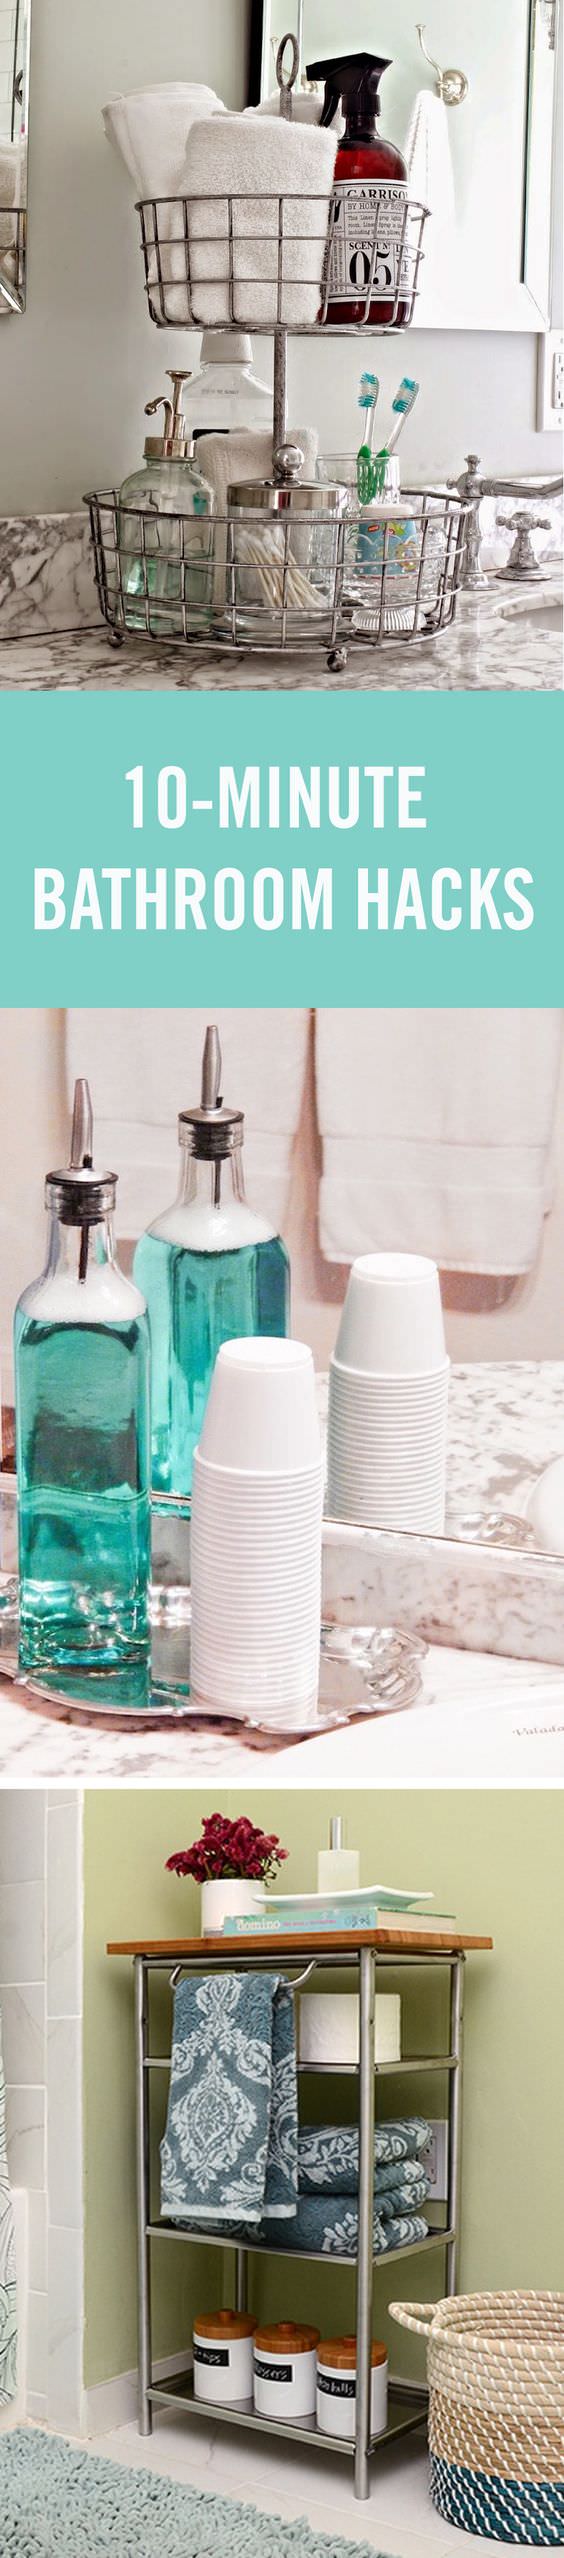 Organizing a bathroom could not be so hard and time consuming, with these 10-minute bathroom organization hacks you can do this quickly and easily!